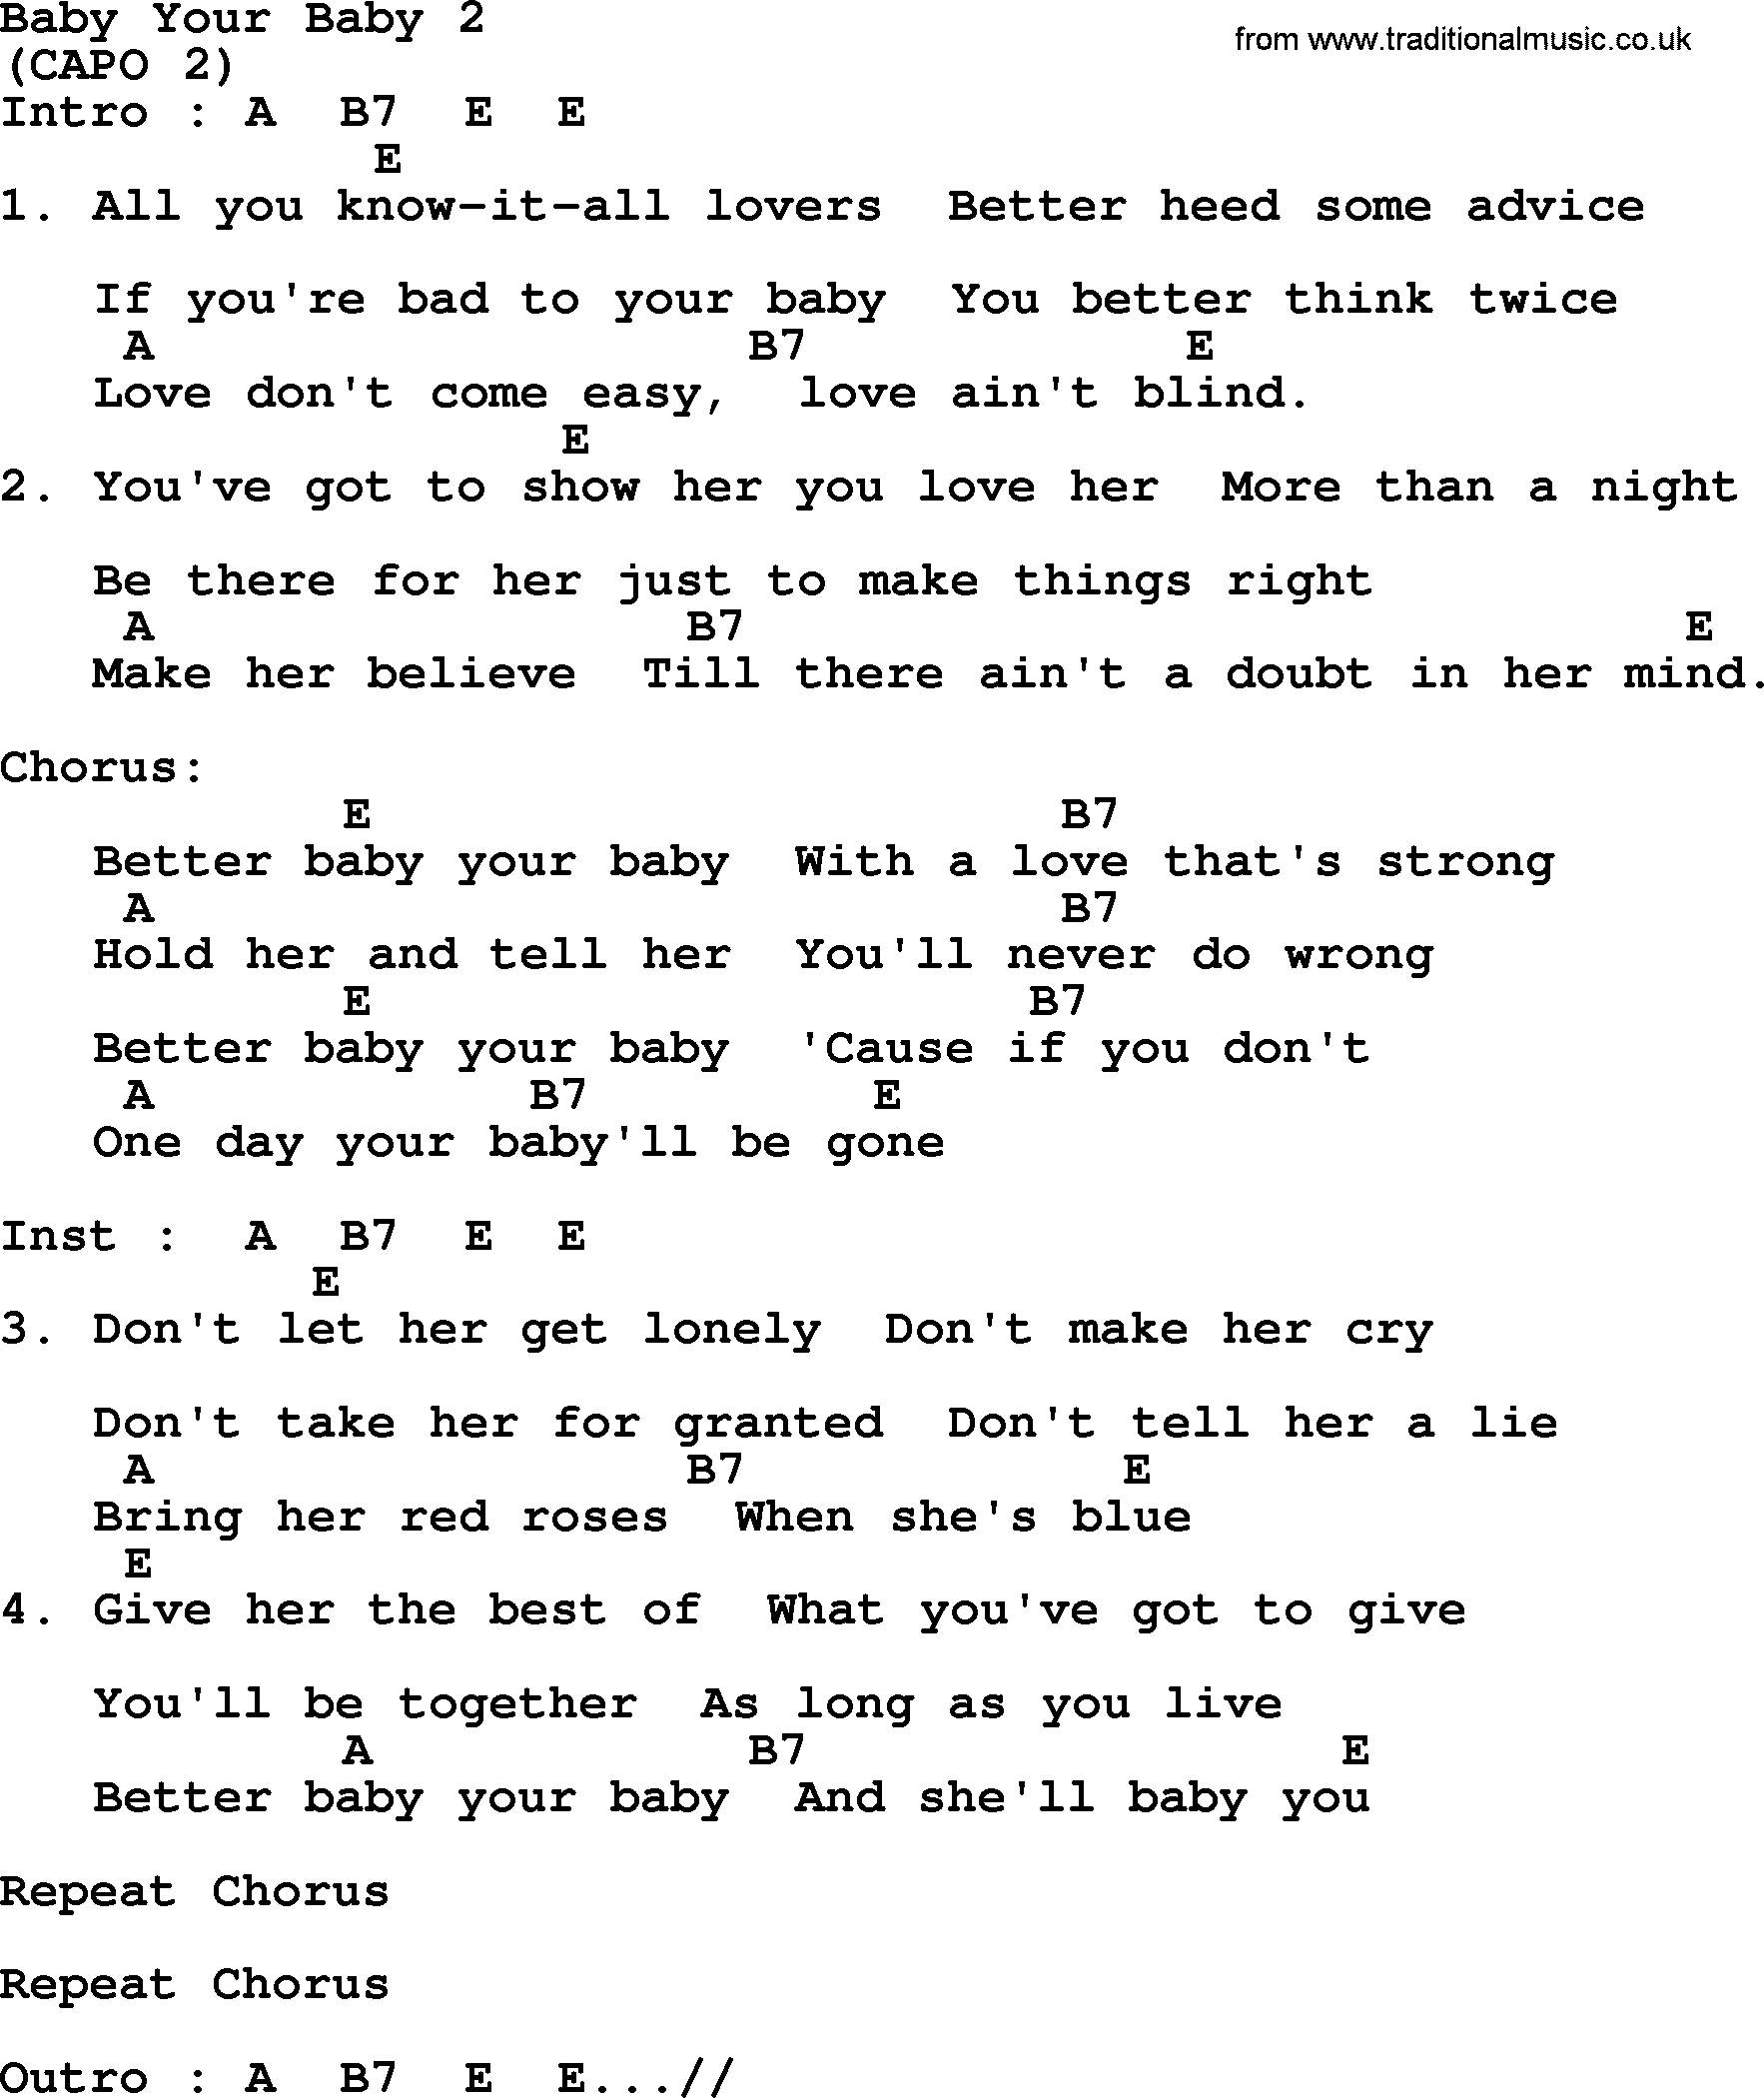 George Strait song: Baby Your Baby 2, lyrics and chords